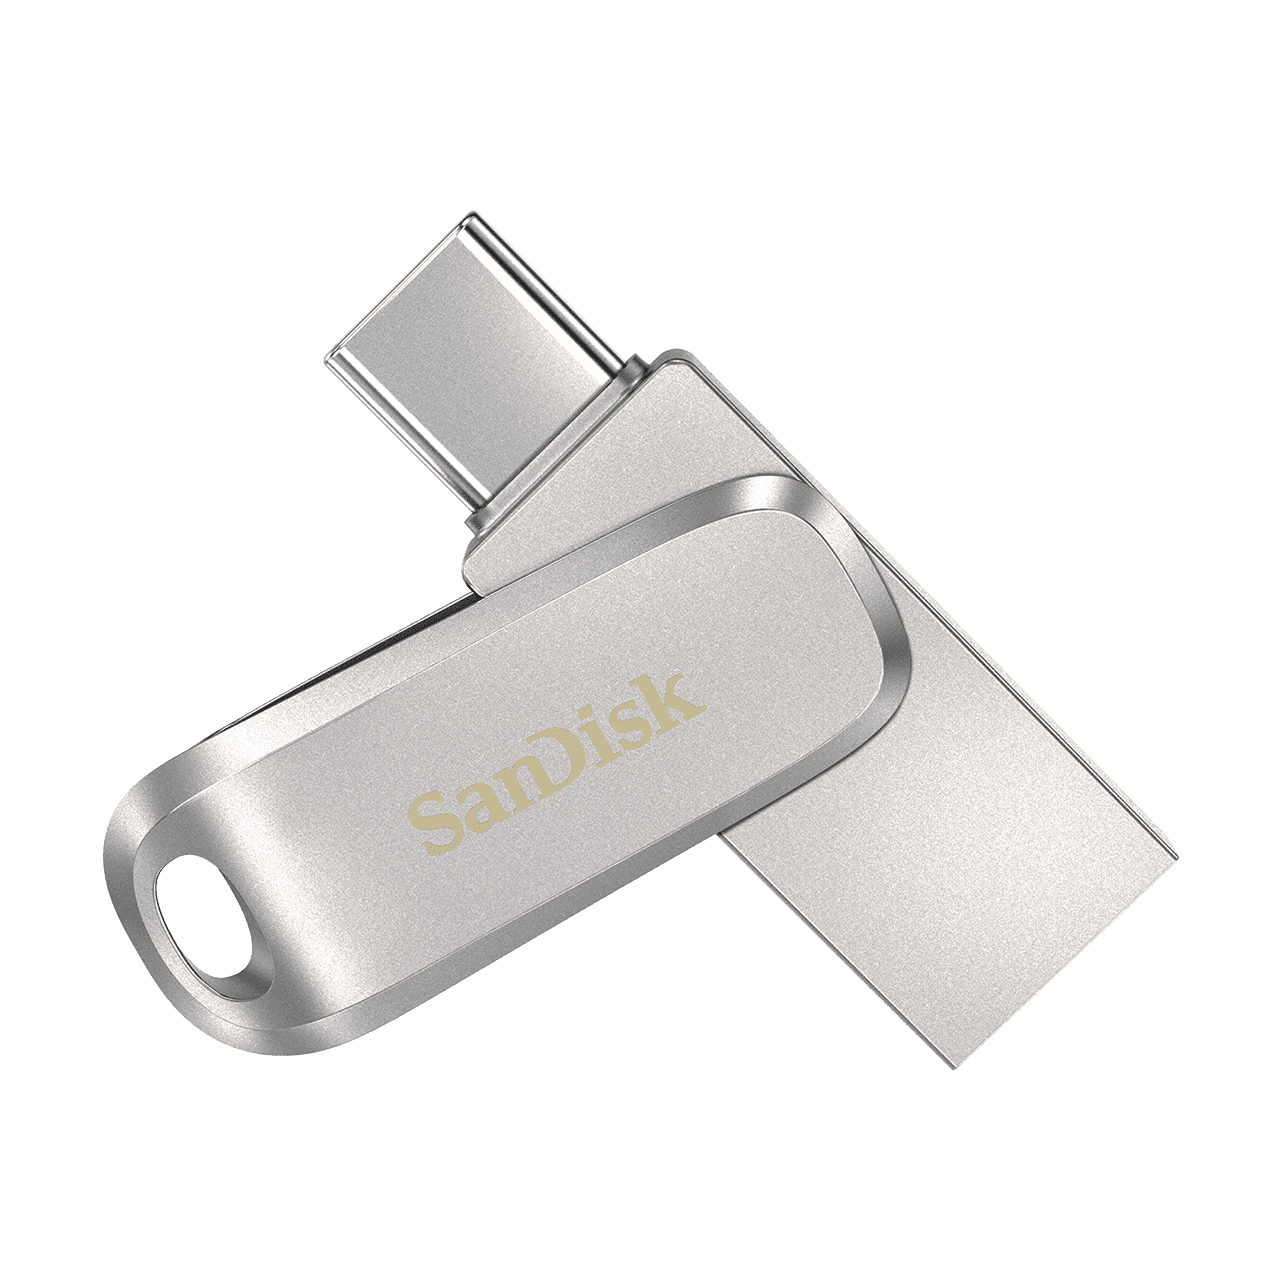 Sandisk 64GB Ultra-Dual Drive Luxe USB 3.1 Flash Drive USB Type-C/Type-A